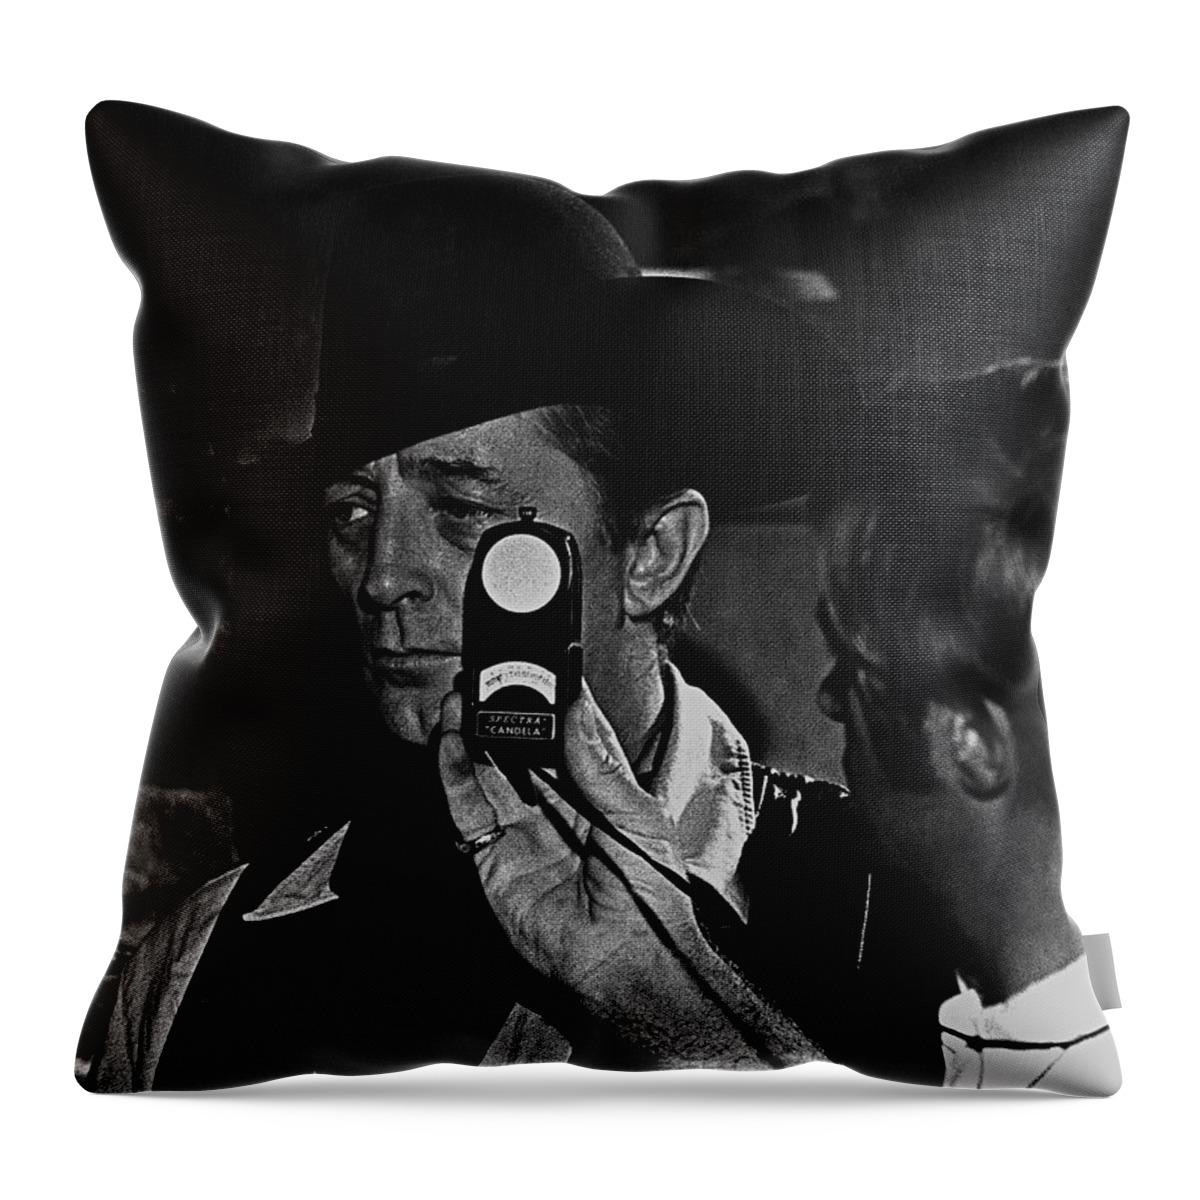 Cinematographer Harry Stradling Jr. Getting Light Reading Robert Mitchum Young Billy Young Set Old Tucson Arizona 1968 Throw Pillow featuring the photograph Cinematographer Harry Stradling Jr. getting light reading Robert Mitchum Young Billy Young set 1968 by David Lee Guss